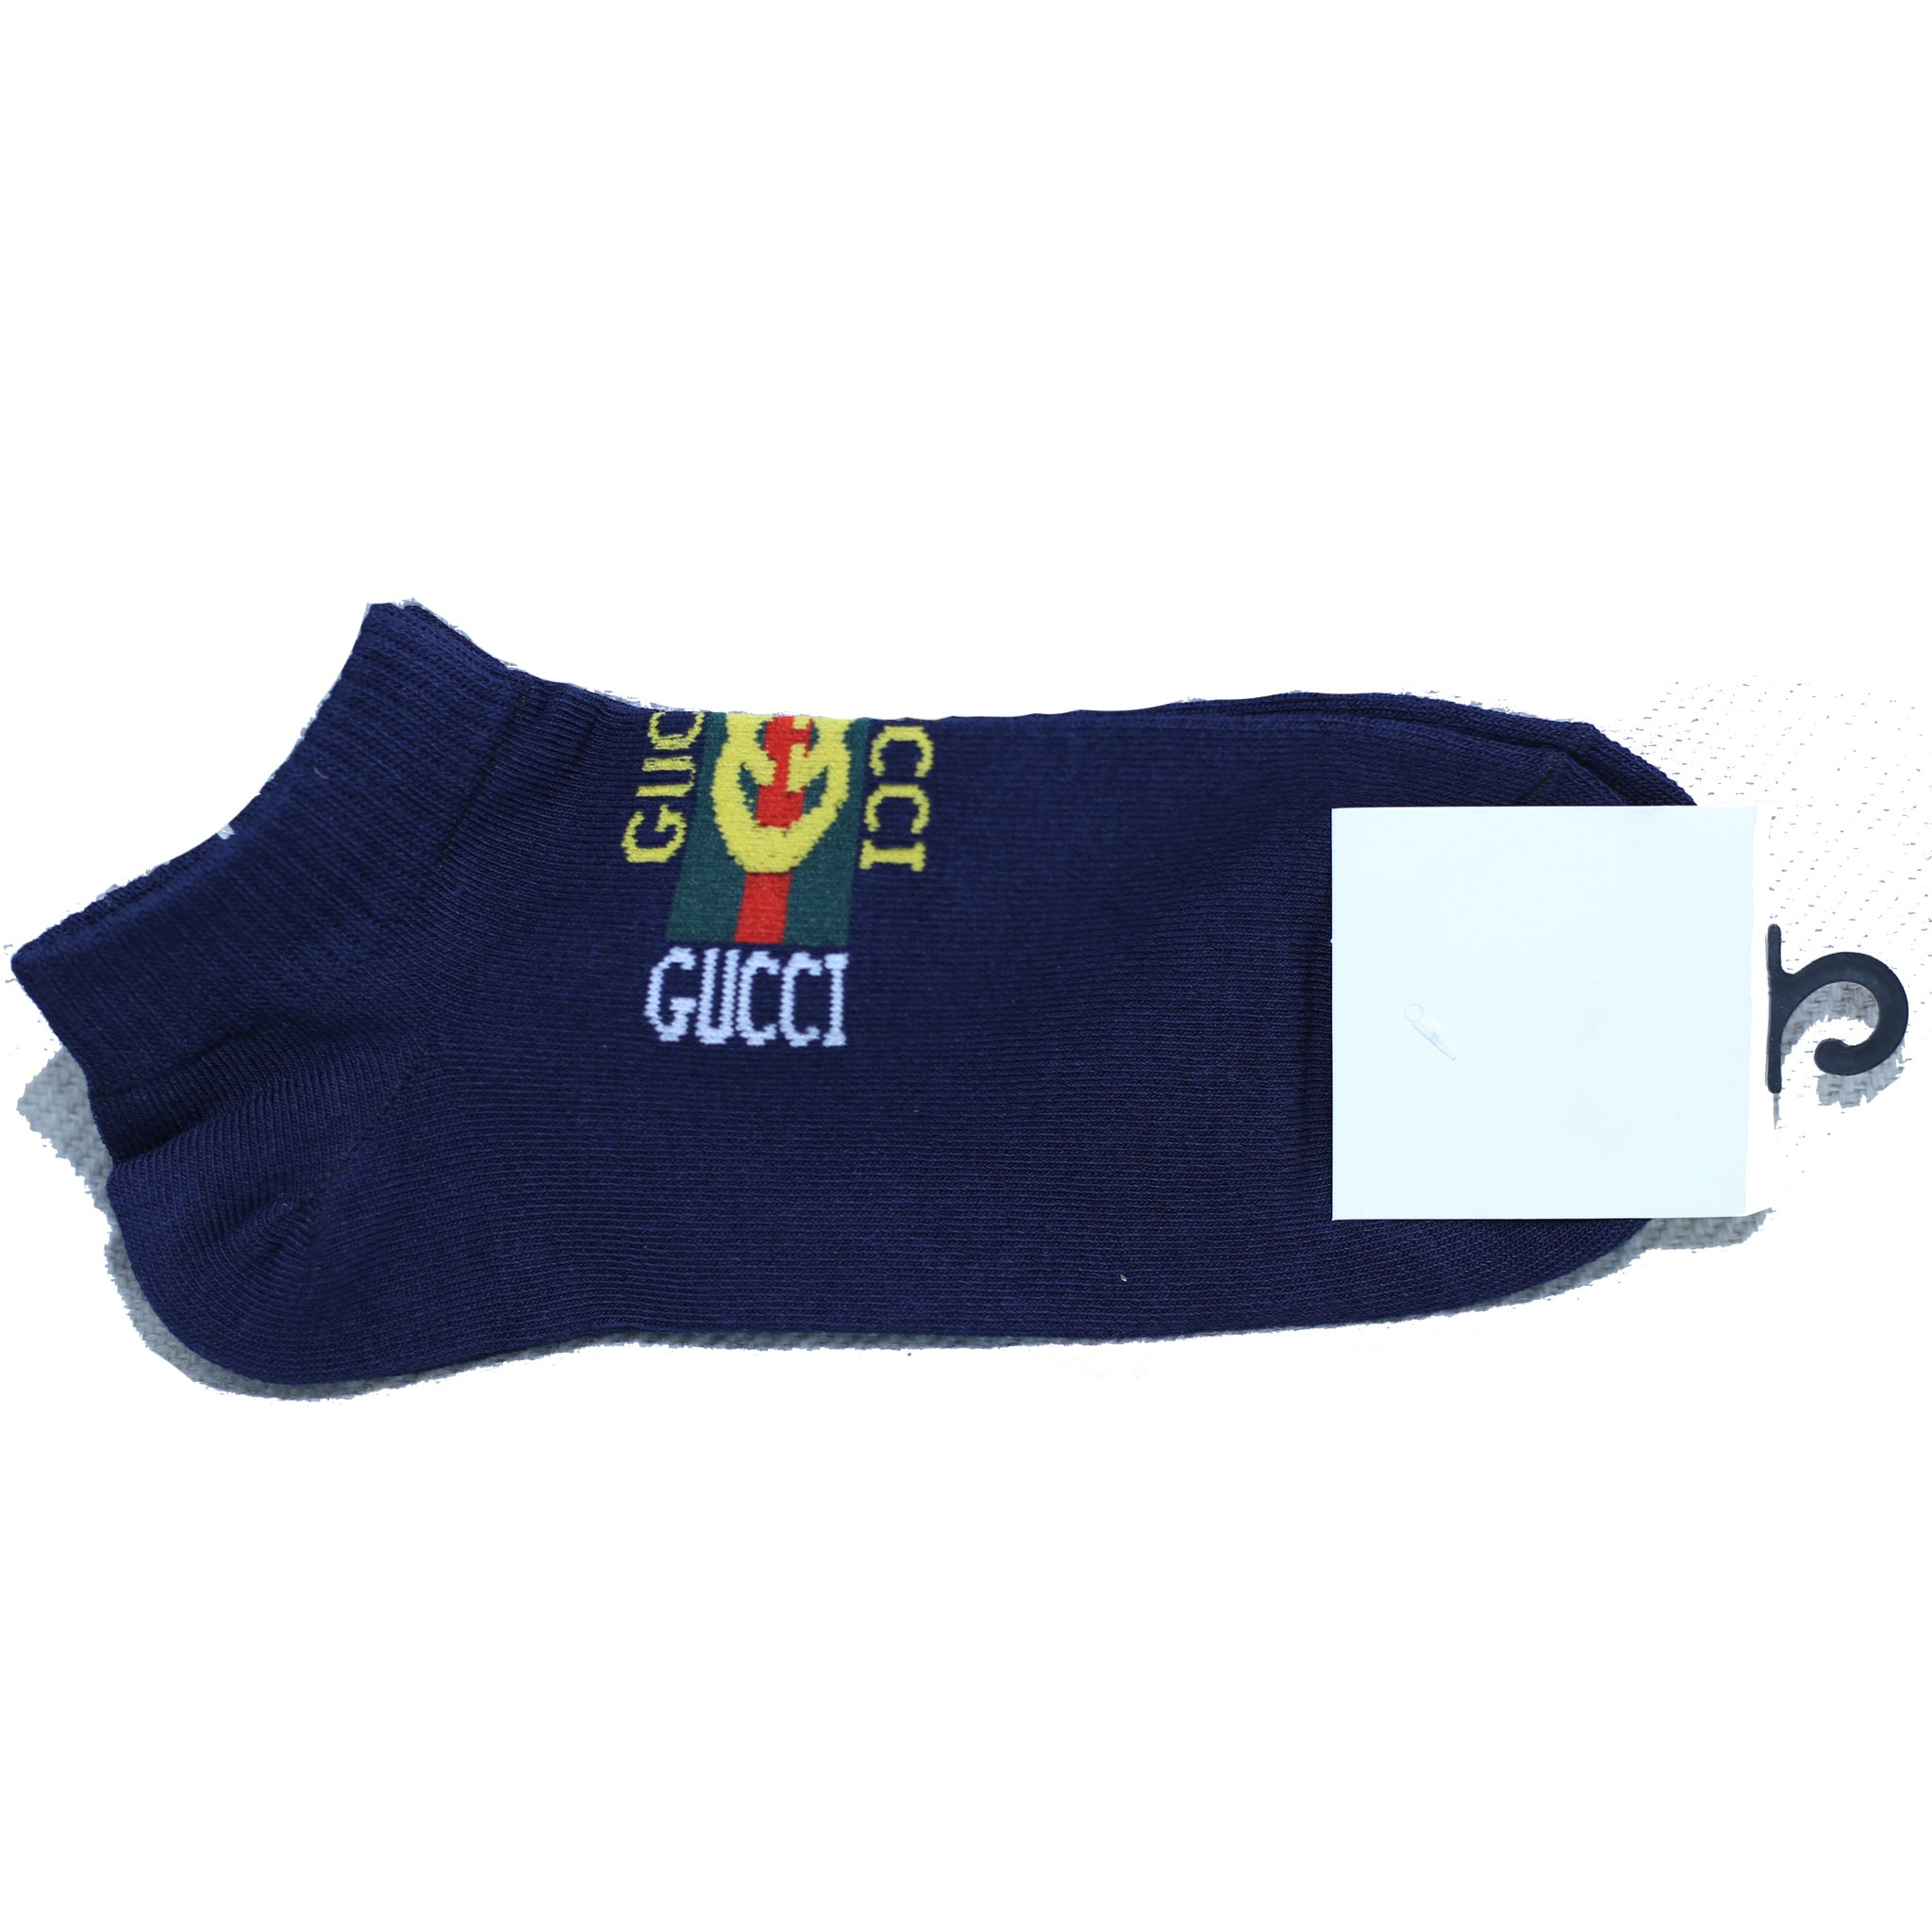 Styled Low Invisible Gucci Socks - Random Store! Apparel and Clothing